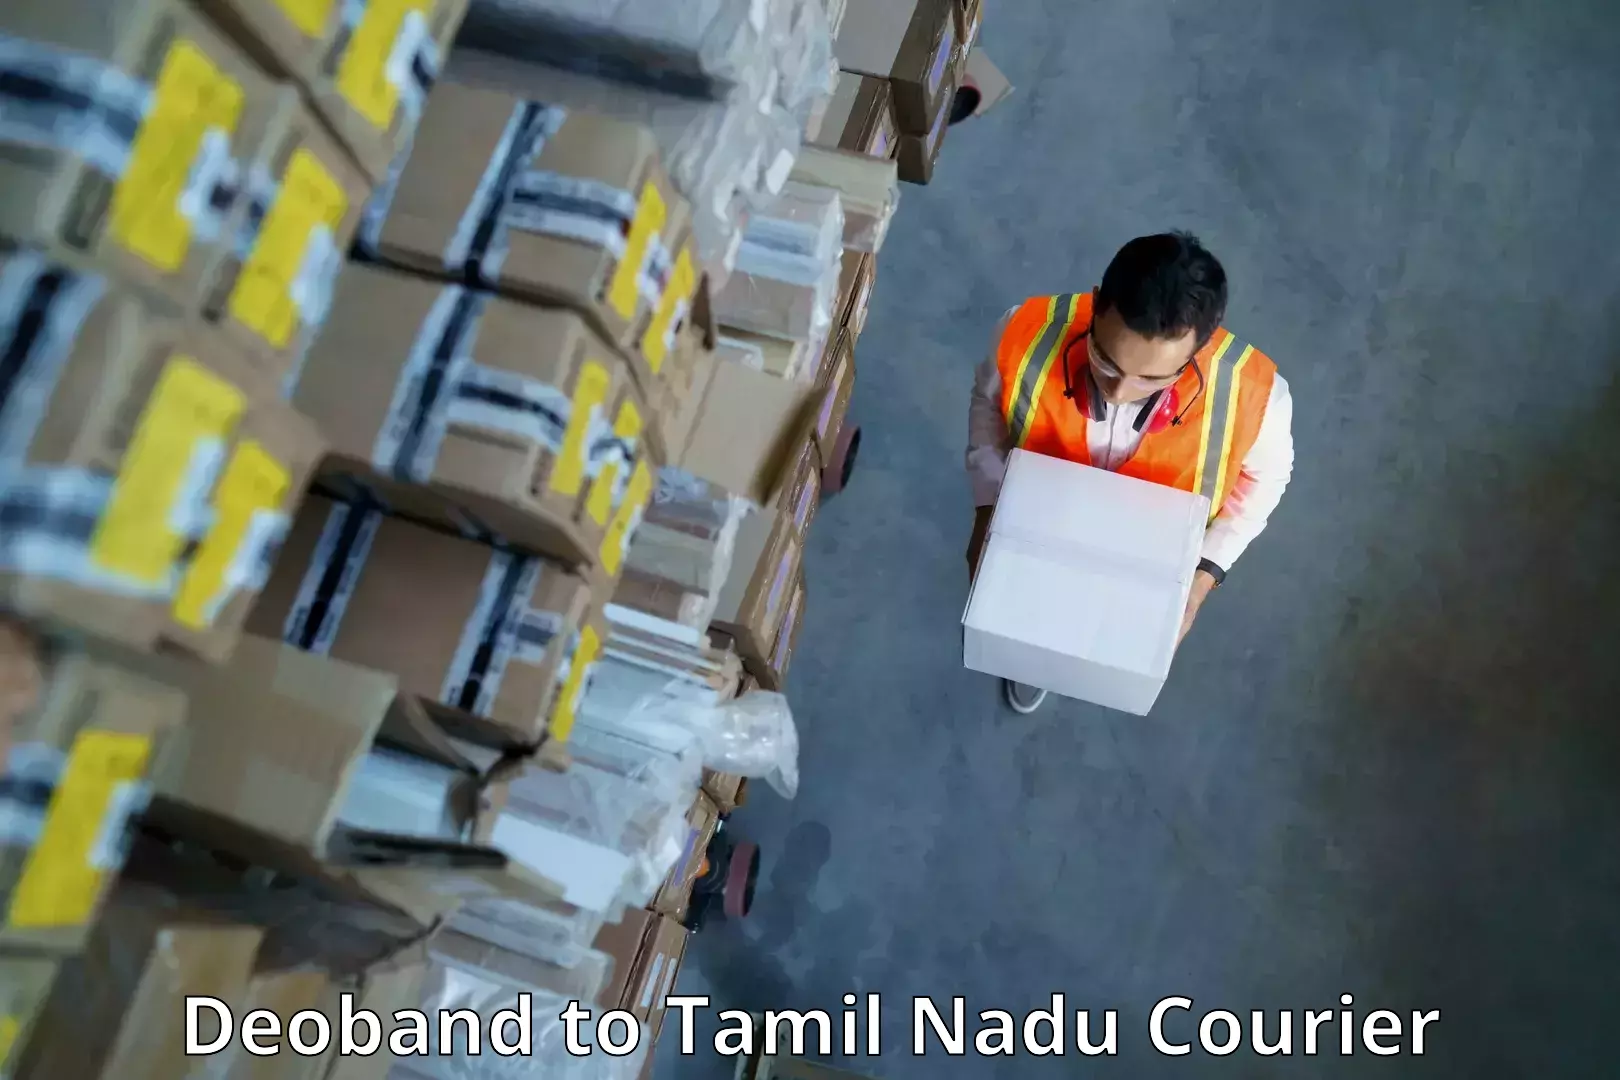 Reliable delivery network Deoband to Thiruvarur